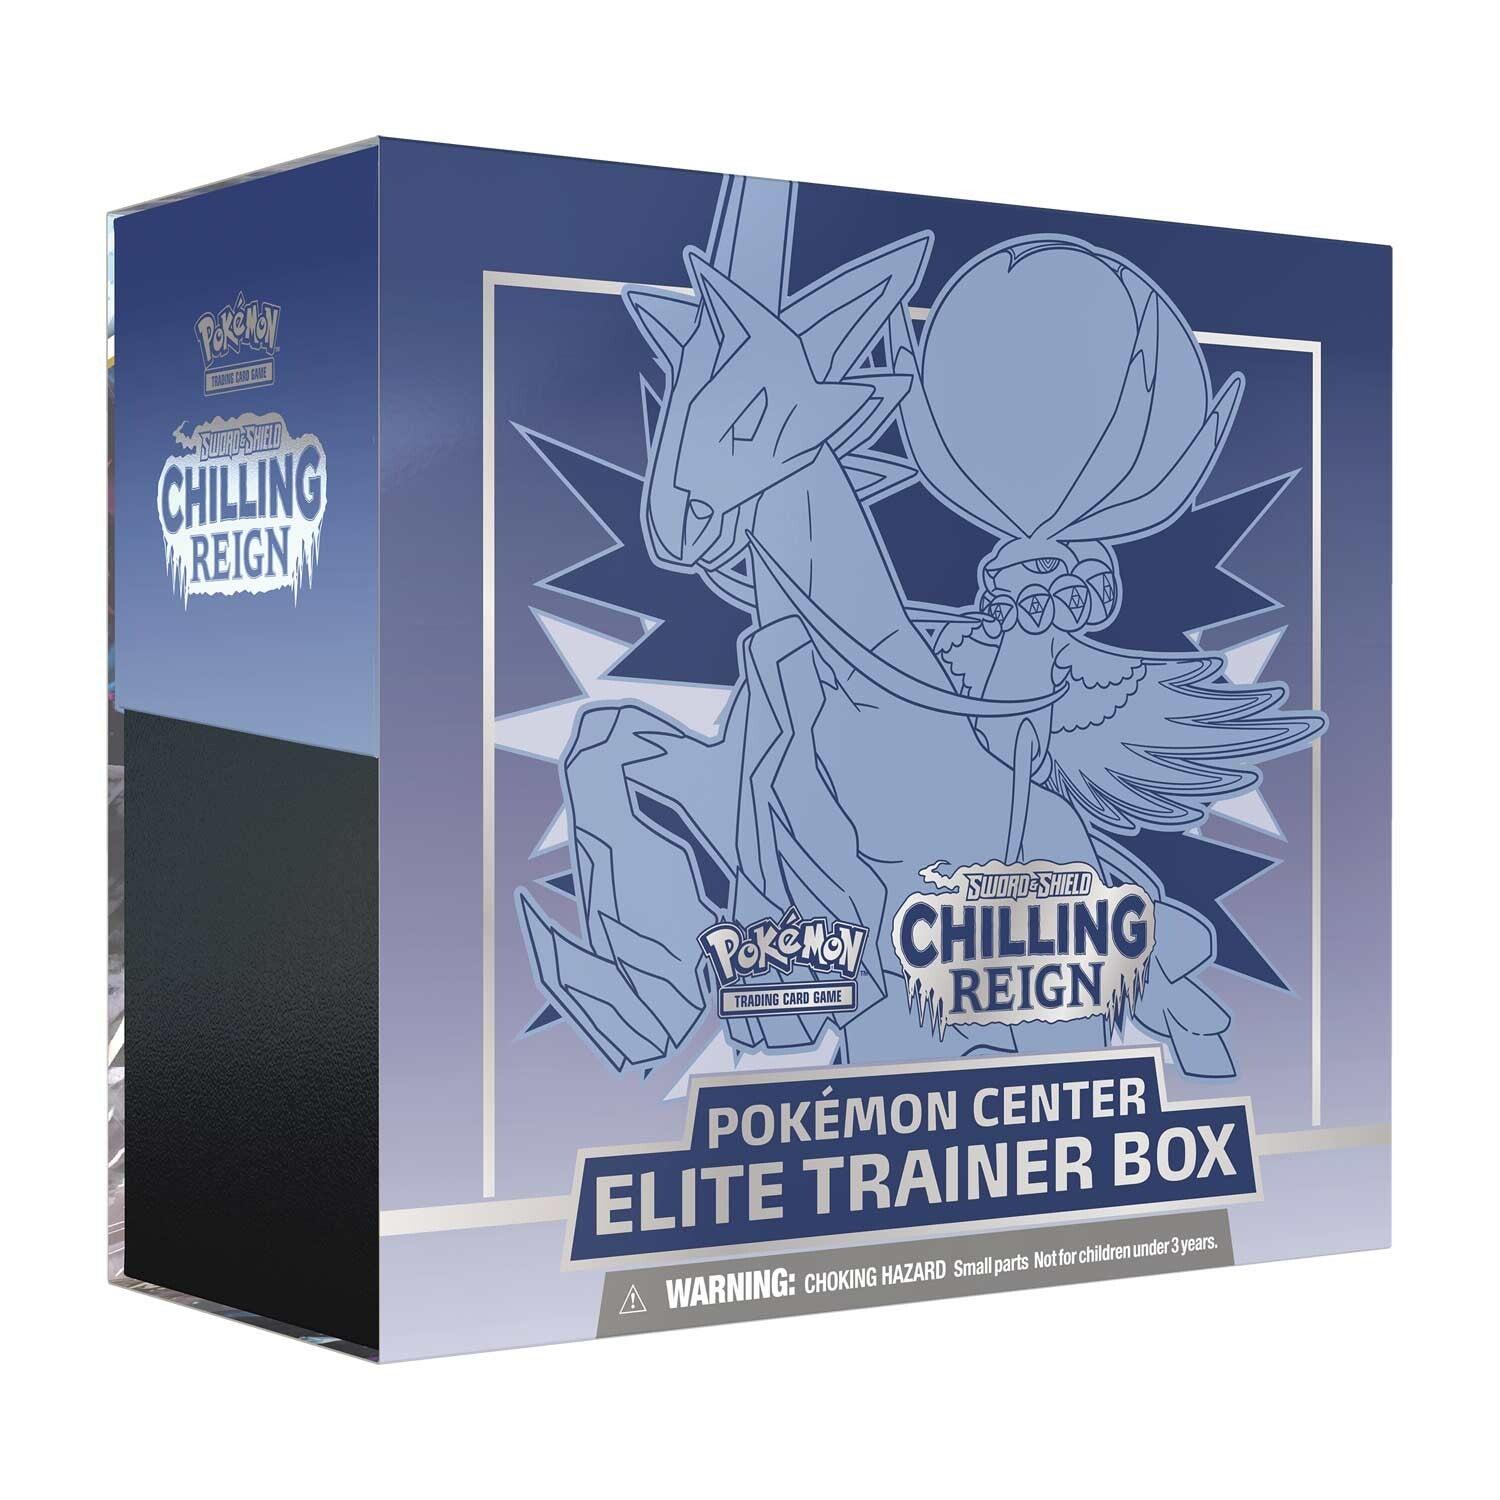 POKÉMON TRADING CARD GAME - POKEMON CENTER EXCLUSIVE - CHILLING REIGN - ELITE TRAINER BOX - ICE RIDER CALYREX **USA EXCLUSIVE IMPORT** | Viridian Forest